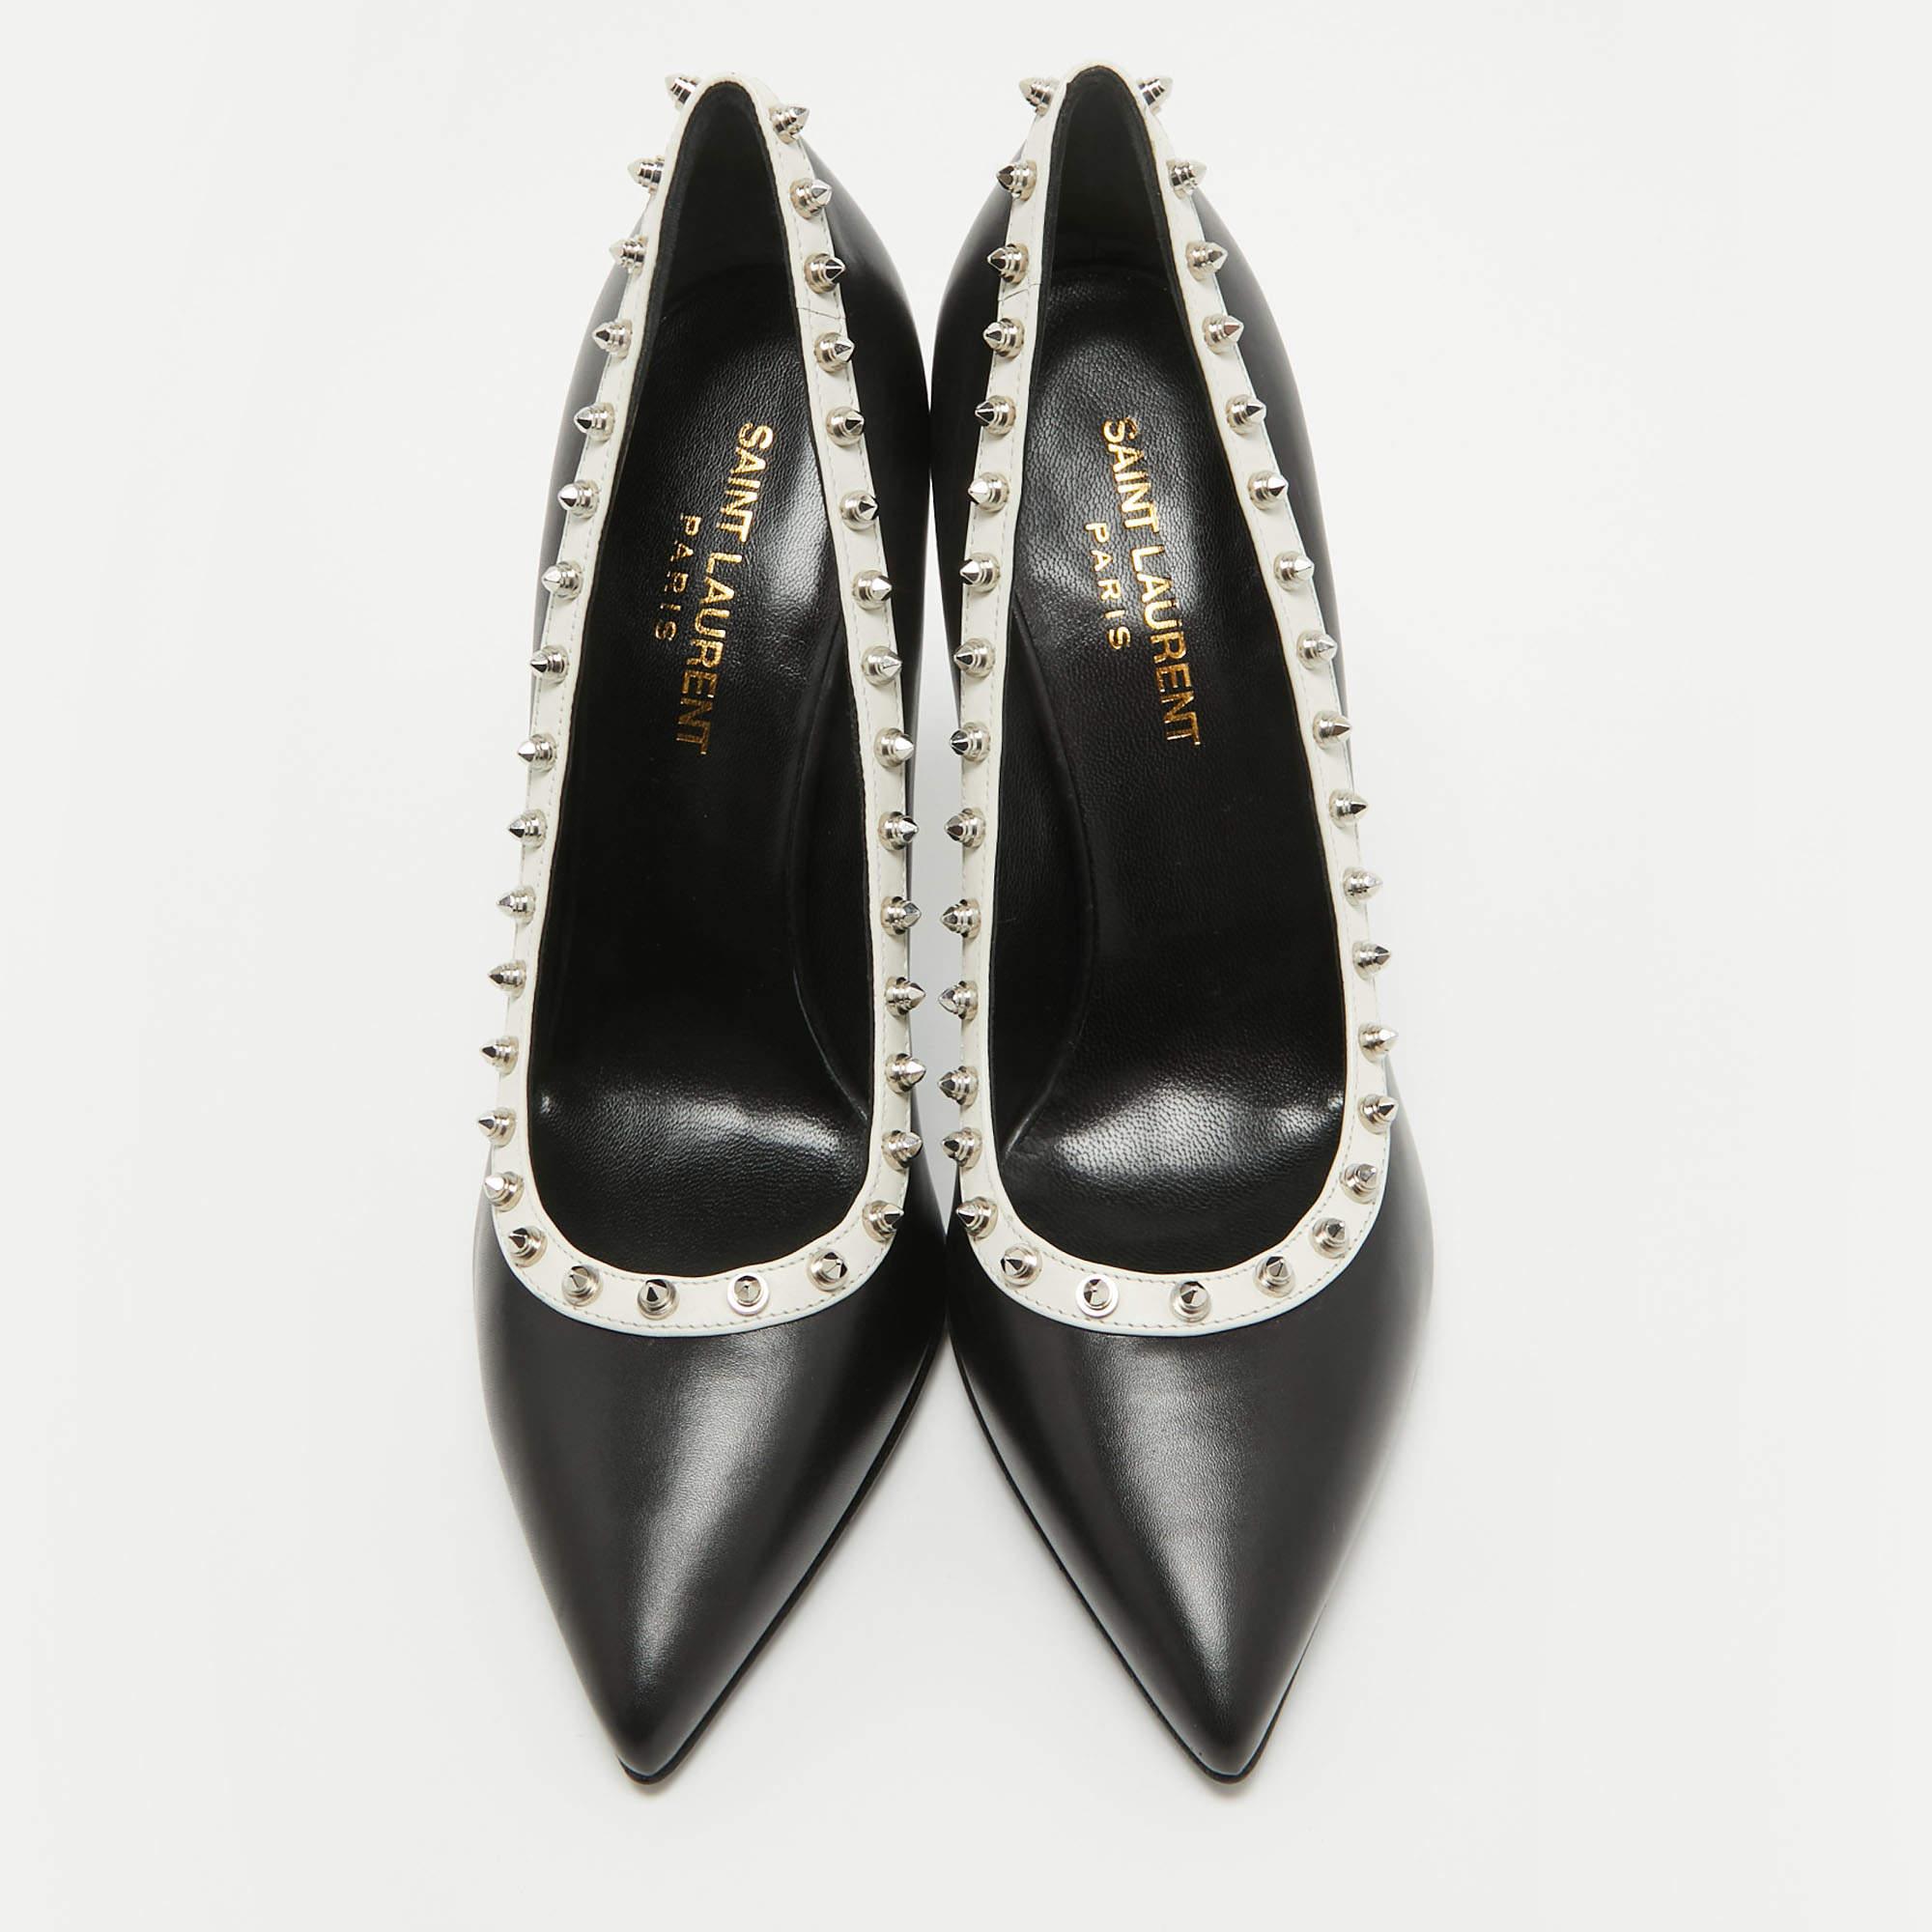 To lend your feet elegance, Saint Laurent brings you these gorgeous studded pumps. From their sleek shape and luscious black finish to their overall appeal, they are utterly mesmerizing. The pumps come crafted from leather and are designed with